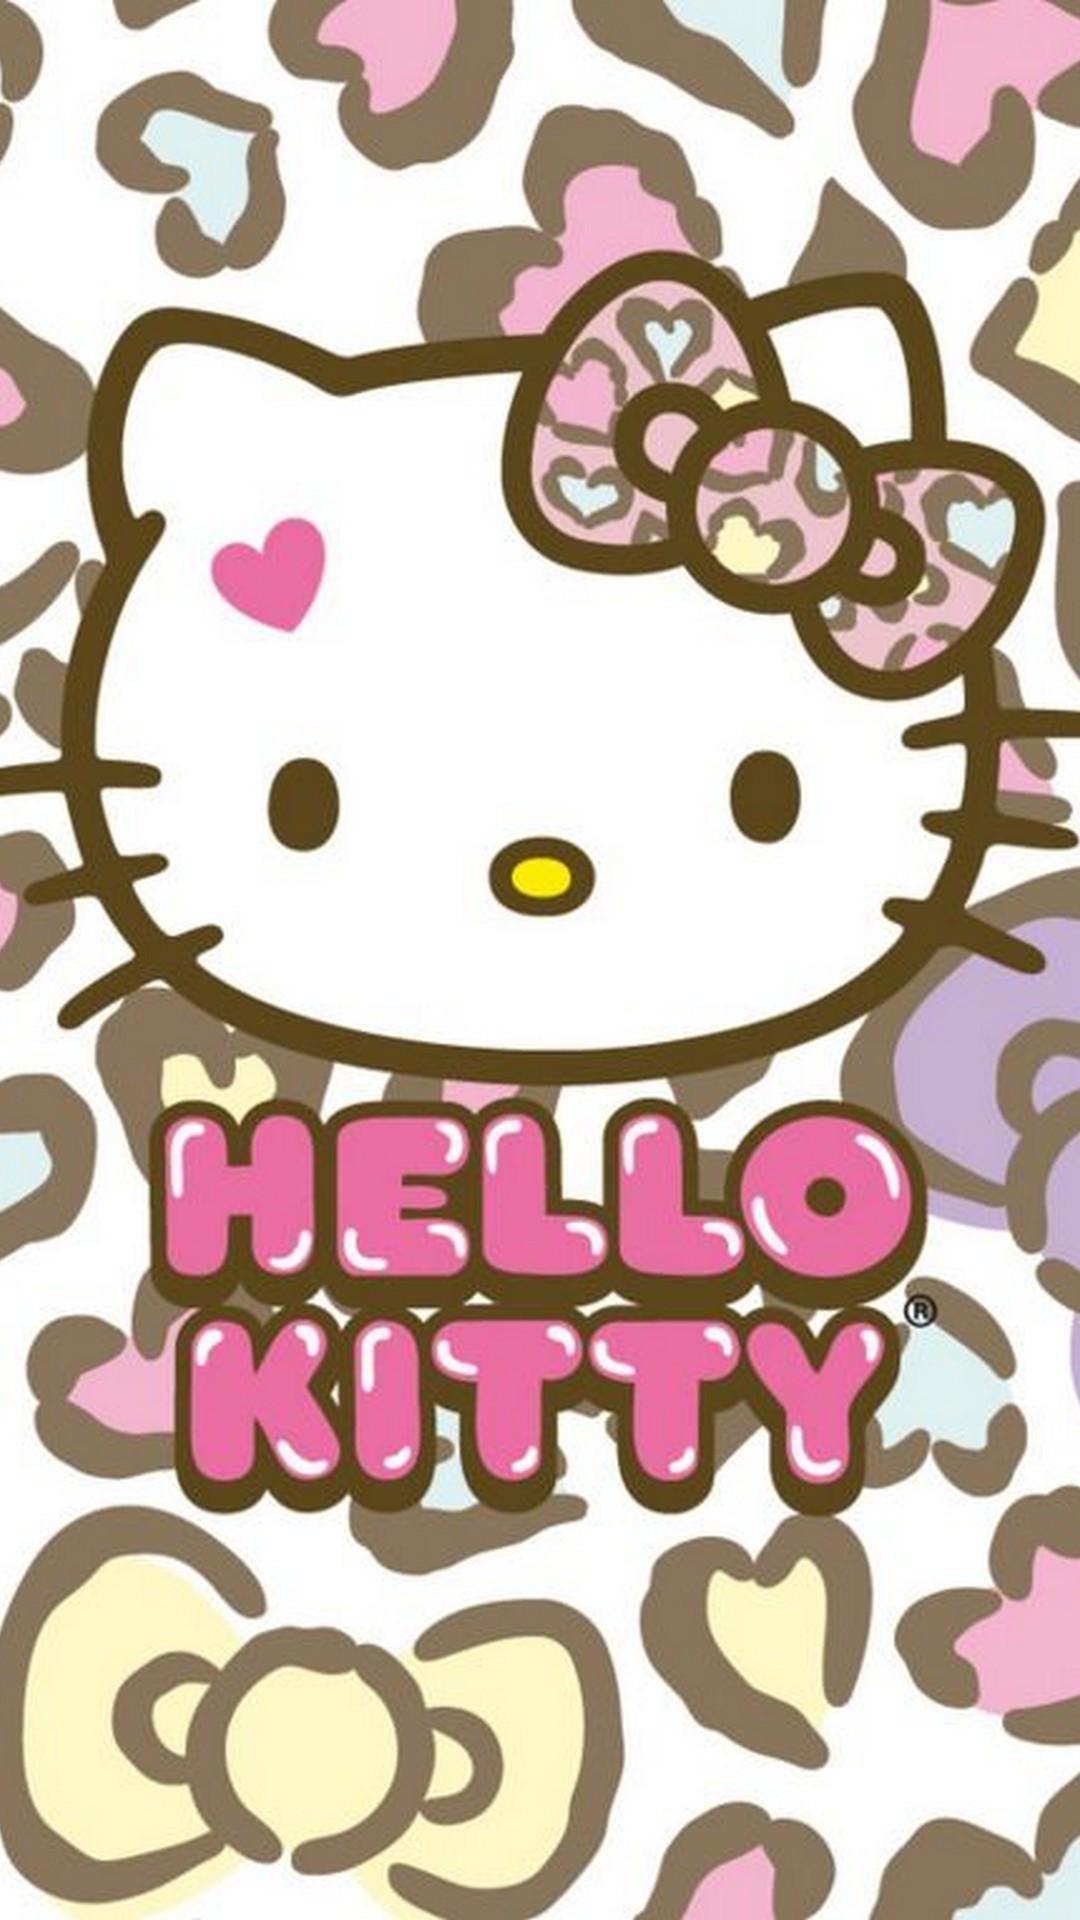 Hello Kitty iPhone Wallpaper HD With Resolution 1080X1920 pixel. You can make this wallpaper for your Desktop Computer Backgrounds, Mac Wallpapers, Android Lock screen or iPhone Screensavers